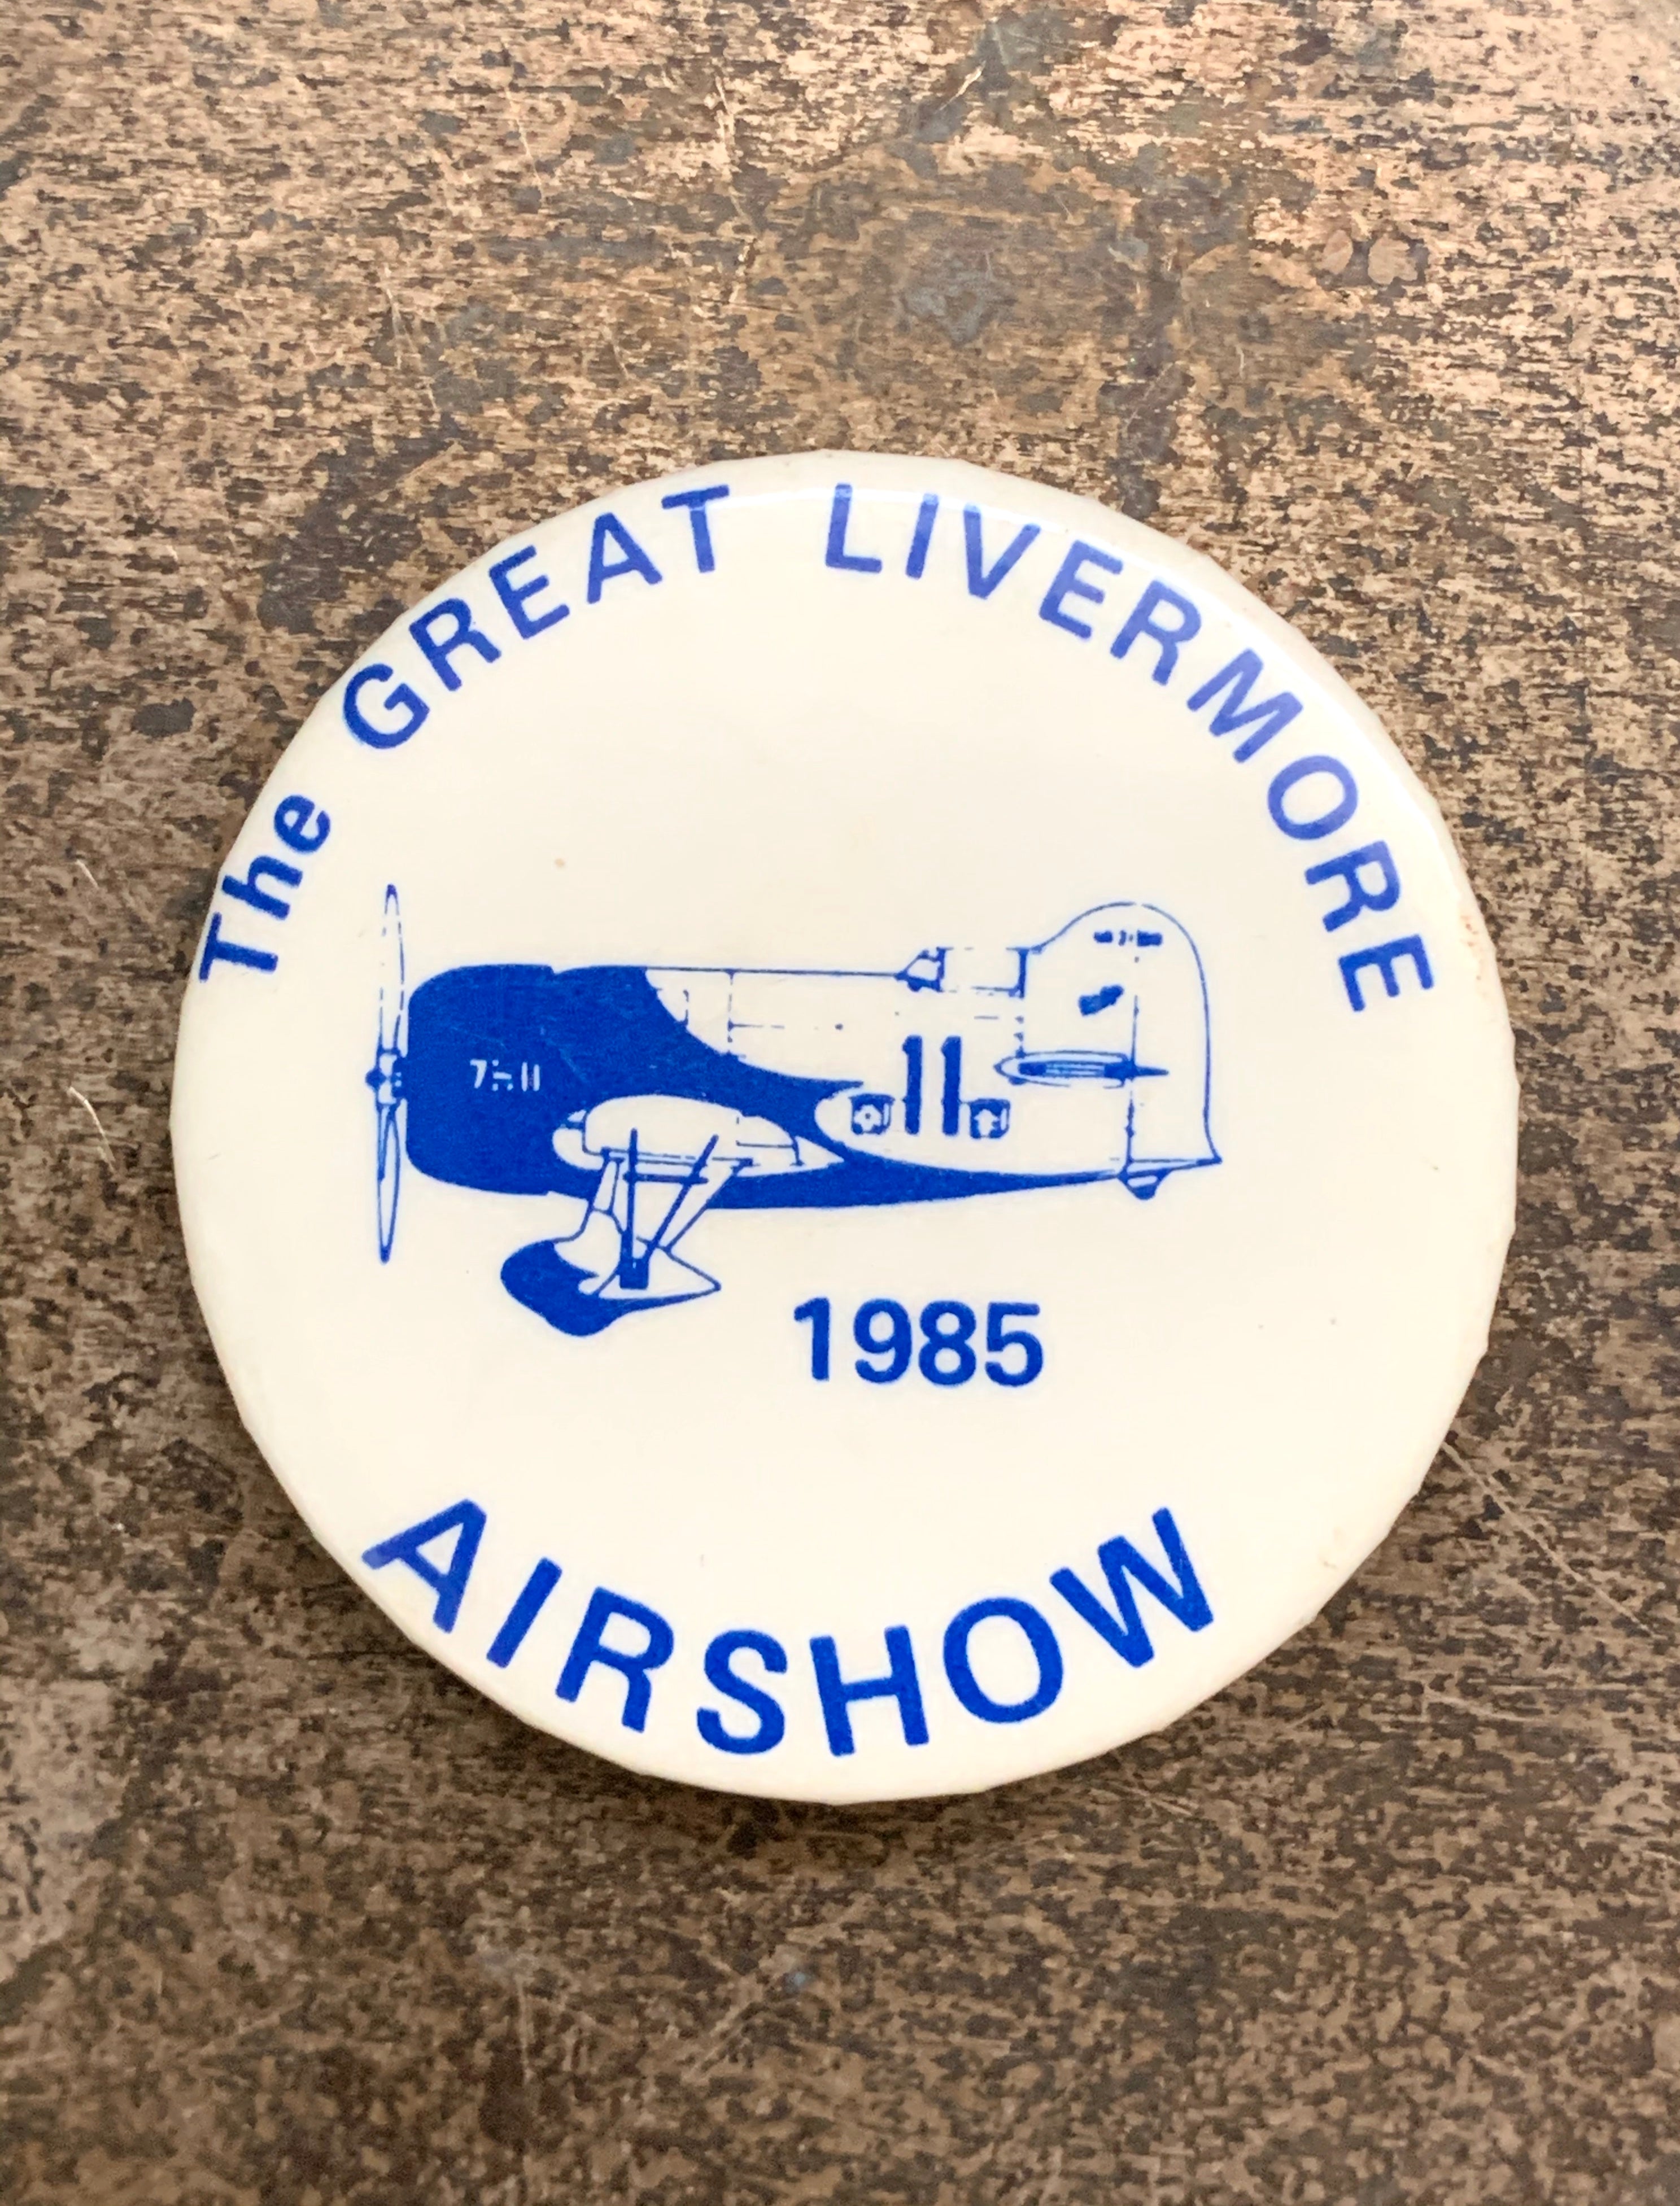 Vintage "The Great Livermore AirShow 1985" Pinback Button